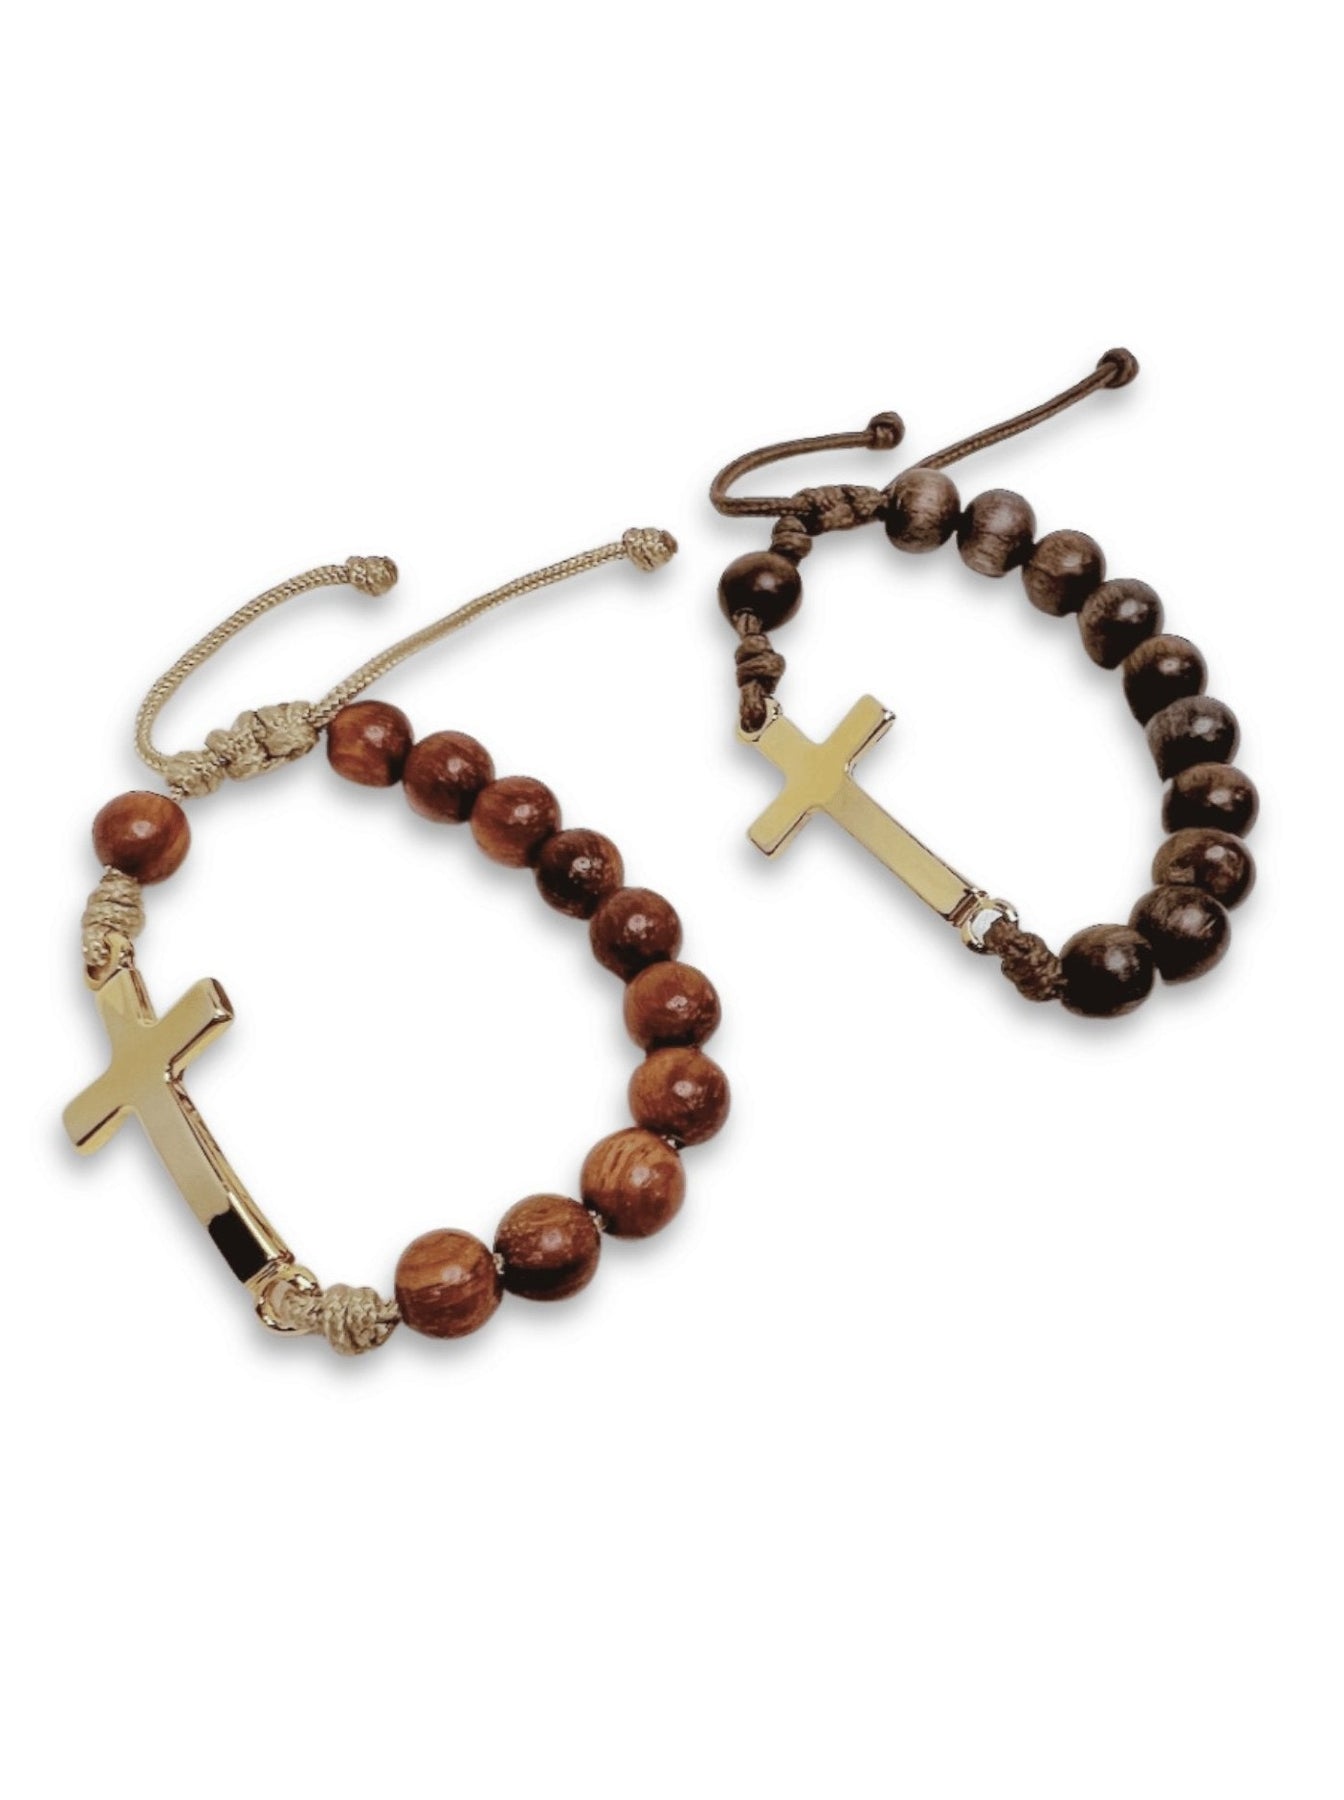 Wood Decennary Rosary Bracelet with Pewter Cross Charm - Holy Hope | NOVICA